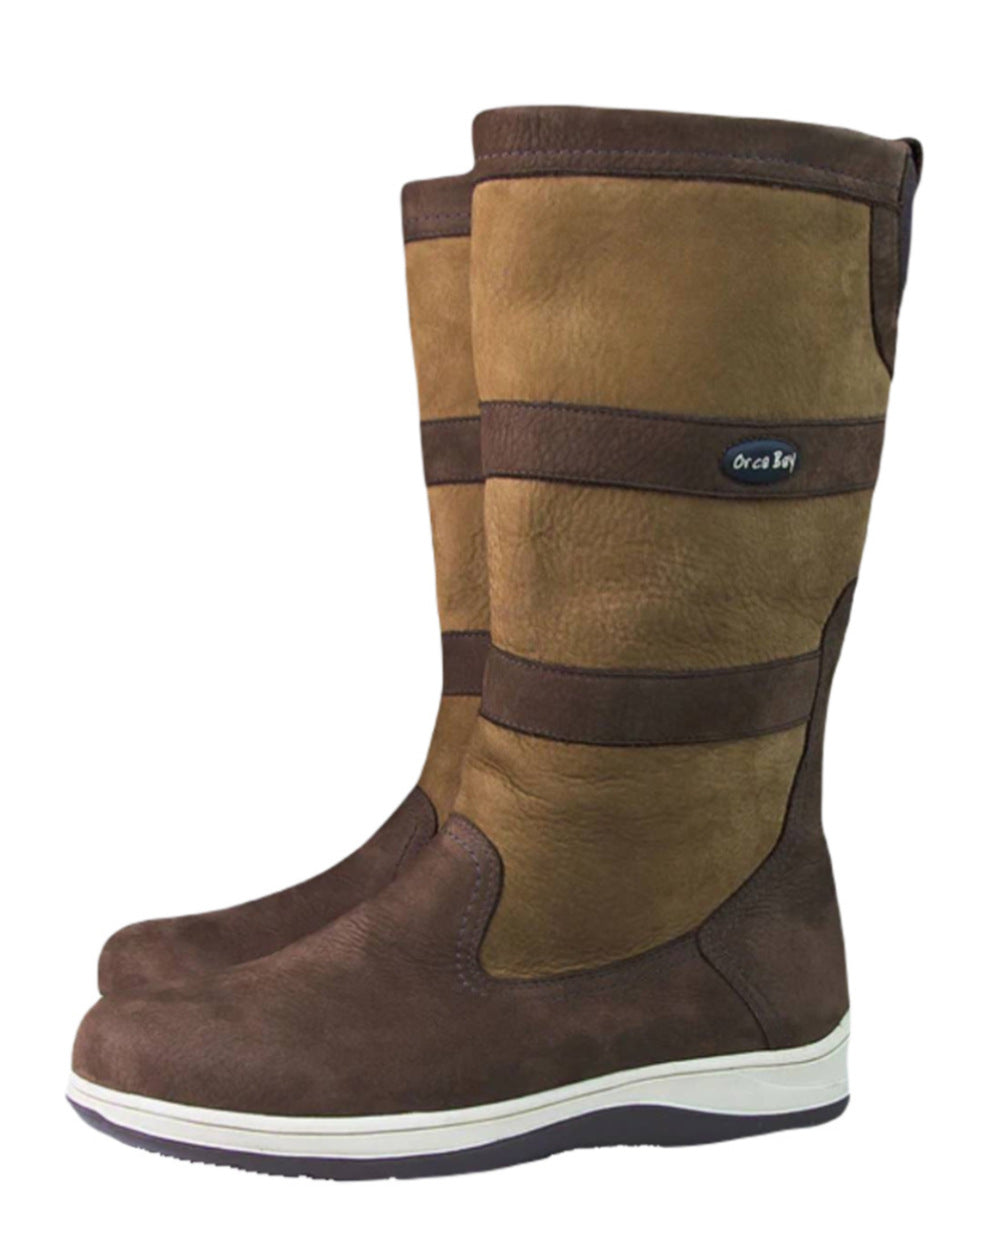 Brown Coloured Orca Bay Storm Sailing Boots On A White Background 